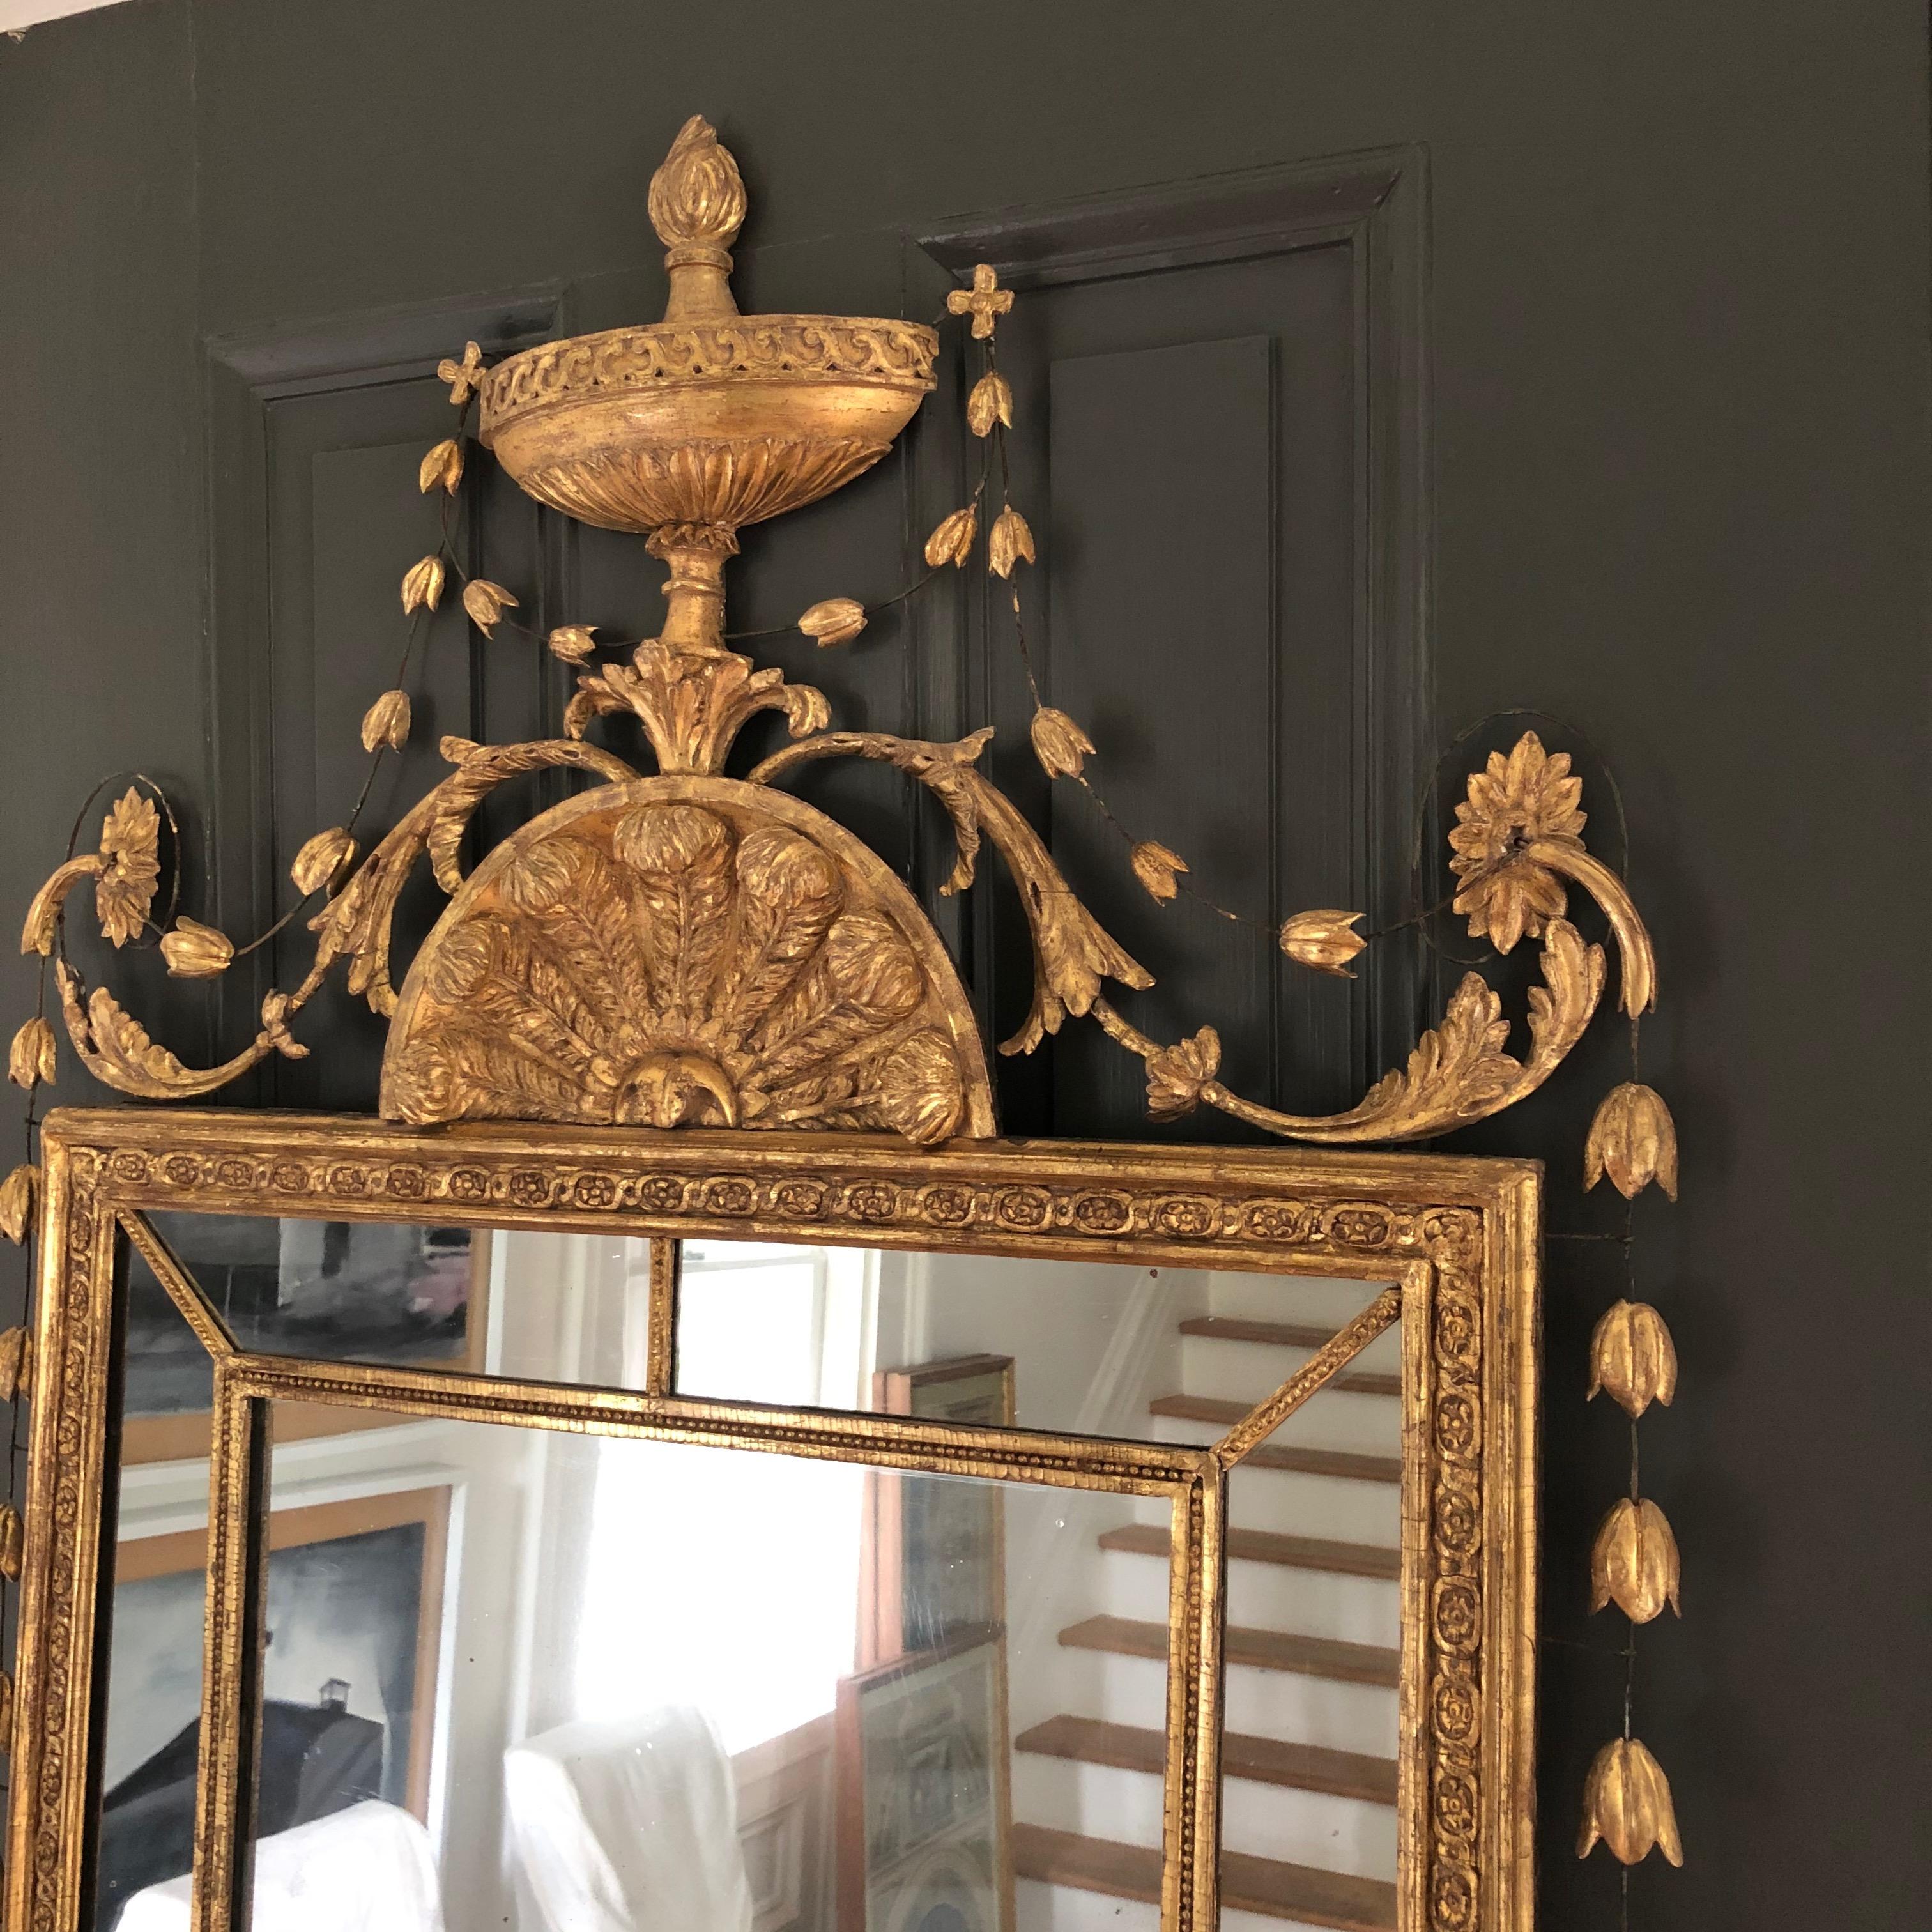 Neoclassical giltwood pier mirror English, circa 1770
Measures: Height 81 in., width 32 1/2 in.
2228.